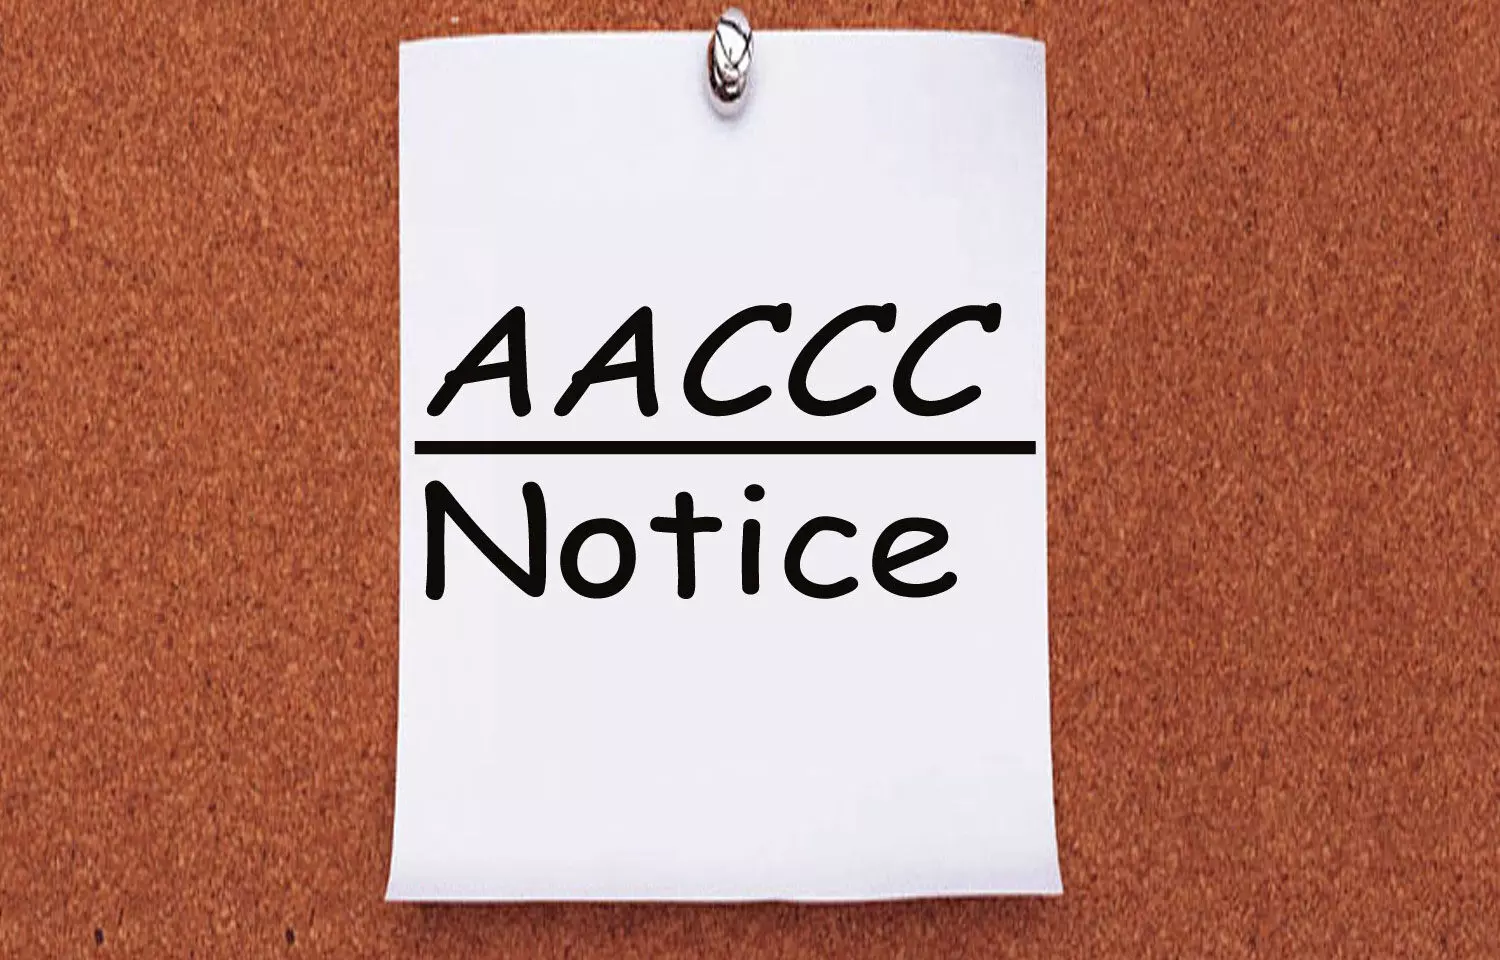 AYUSH UG Admissions: AACCC issues notice for Not-upgraded candidates, Details